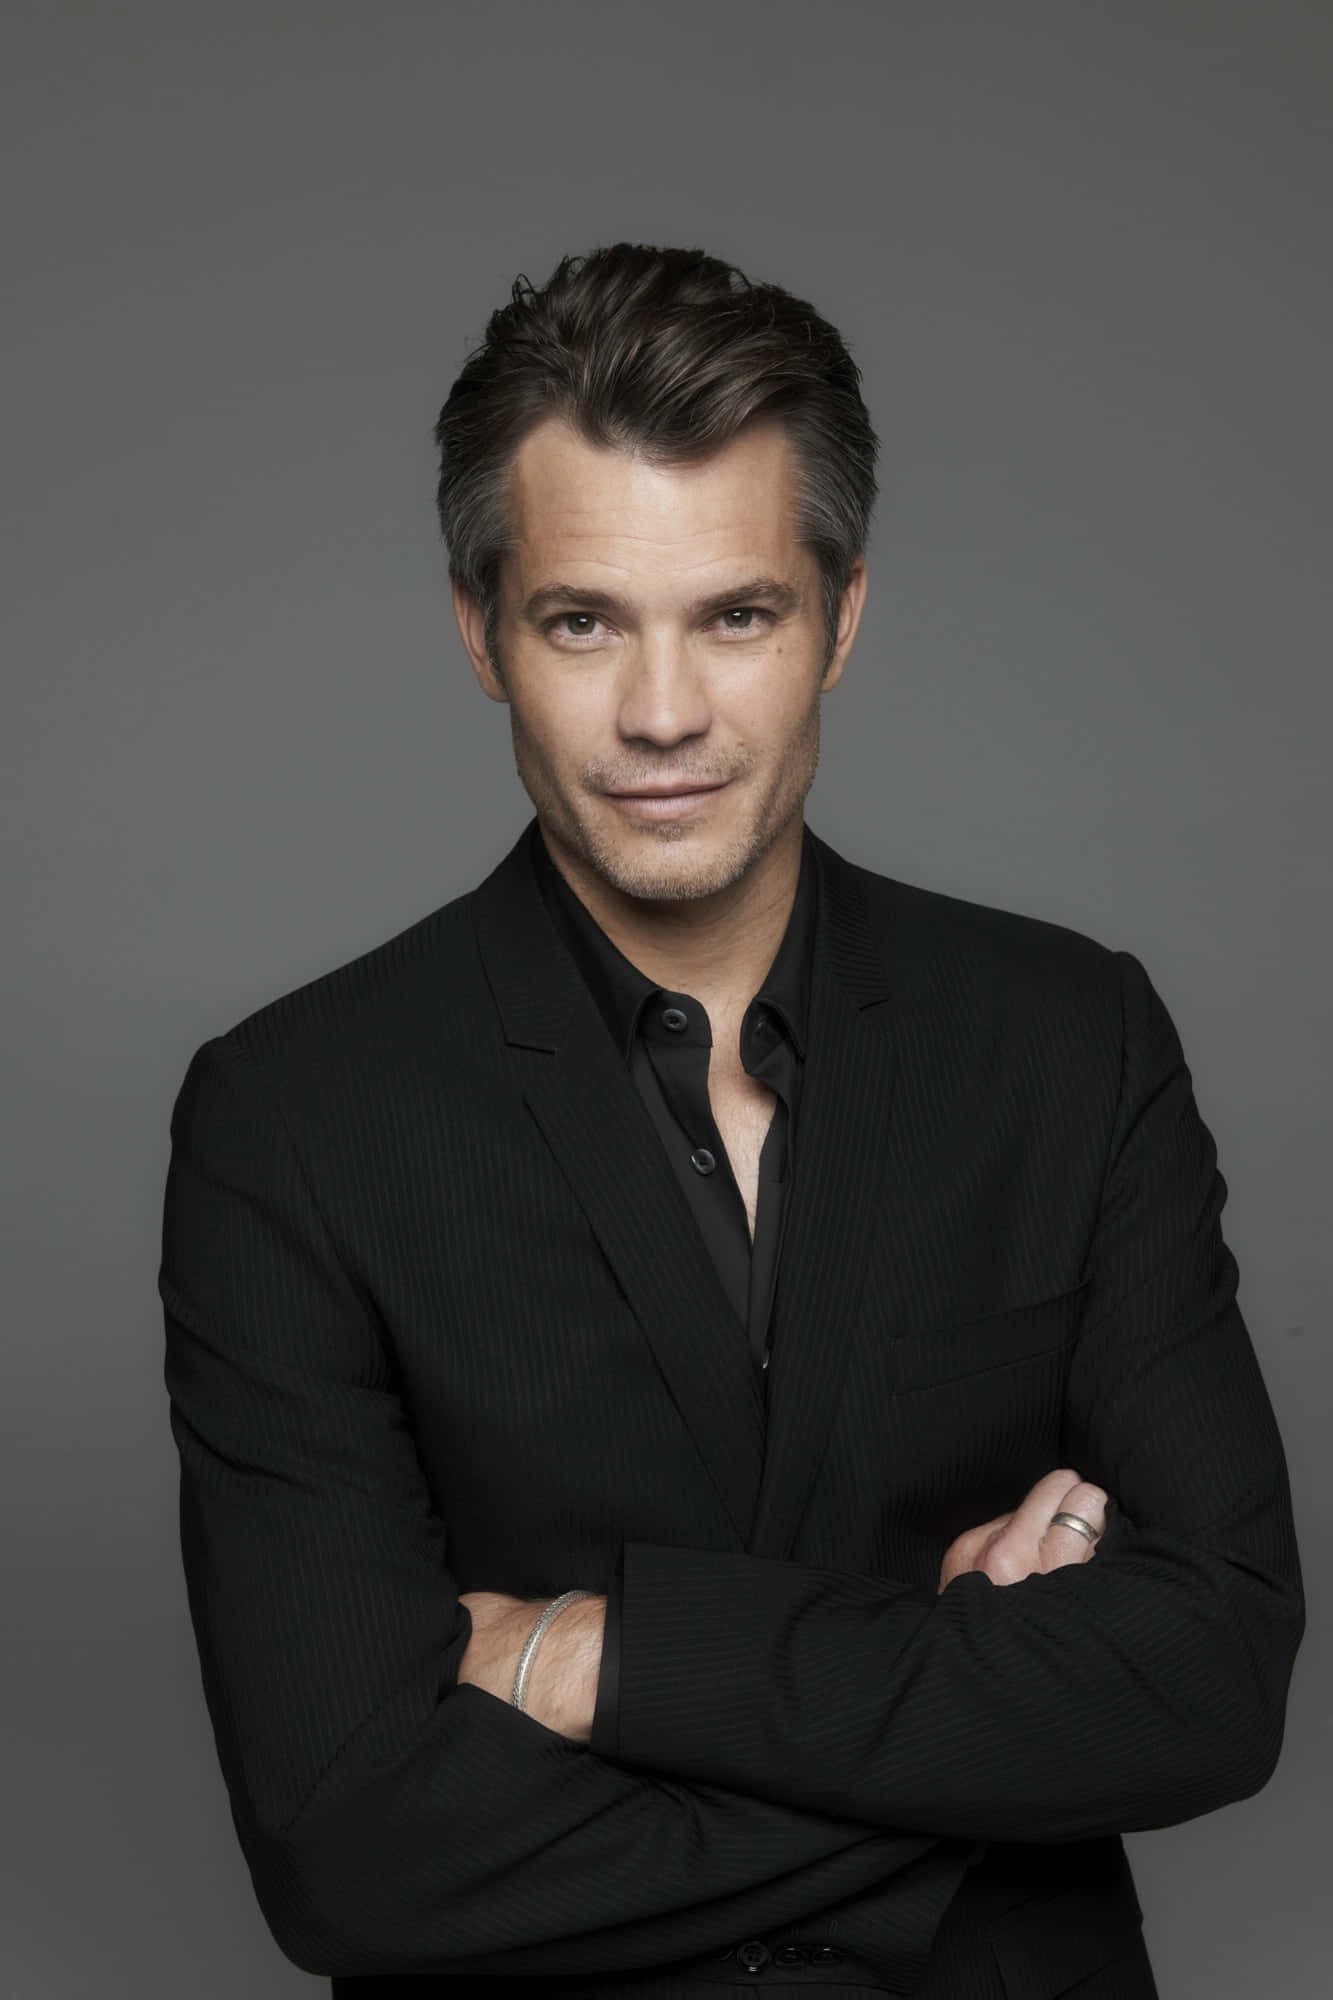 Timothy Olyphant Striking A Confident Pose Wallpaper